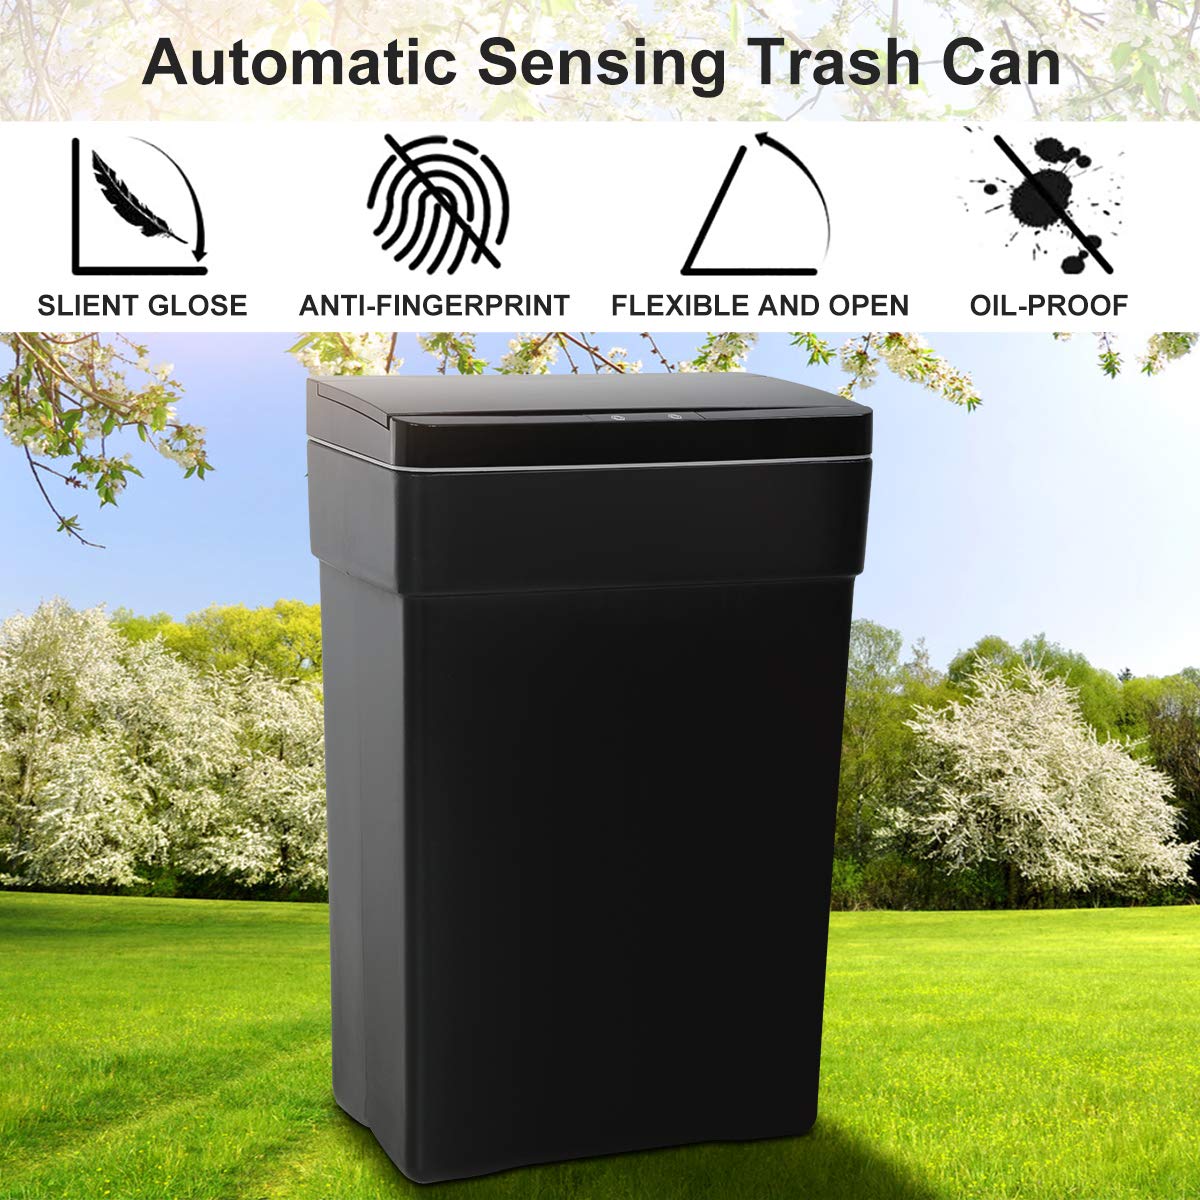 Dkelincs 13 Gallon Trash Can Automatic Motion Sensor Kitchen Trash Can Plastic High-Capacity Touch Free Garbage Can with Lid for Bathroom Bedroom Home Office, 50 Liter, Black